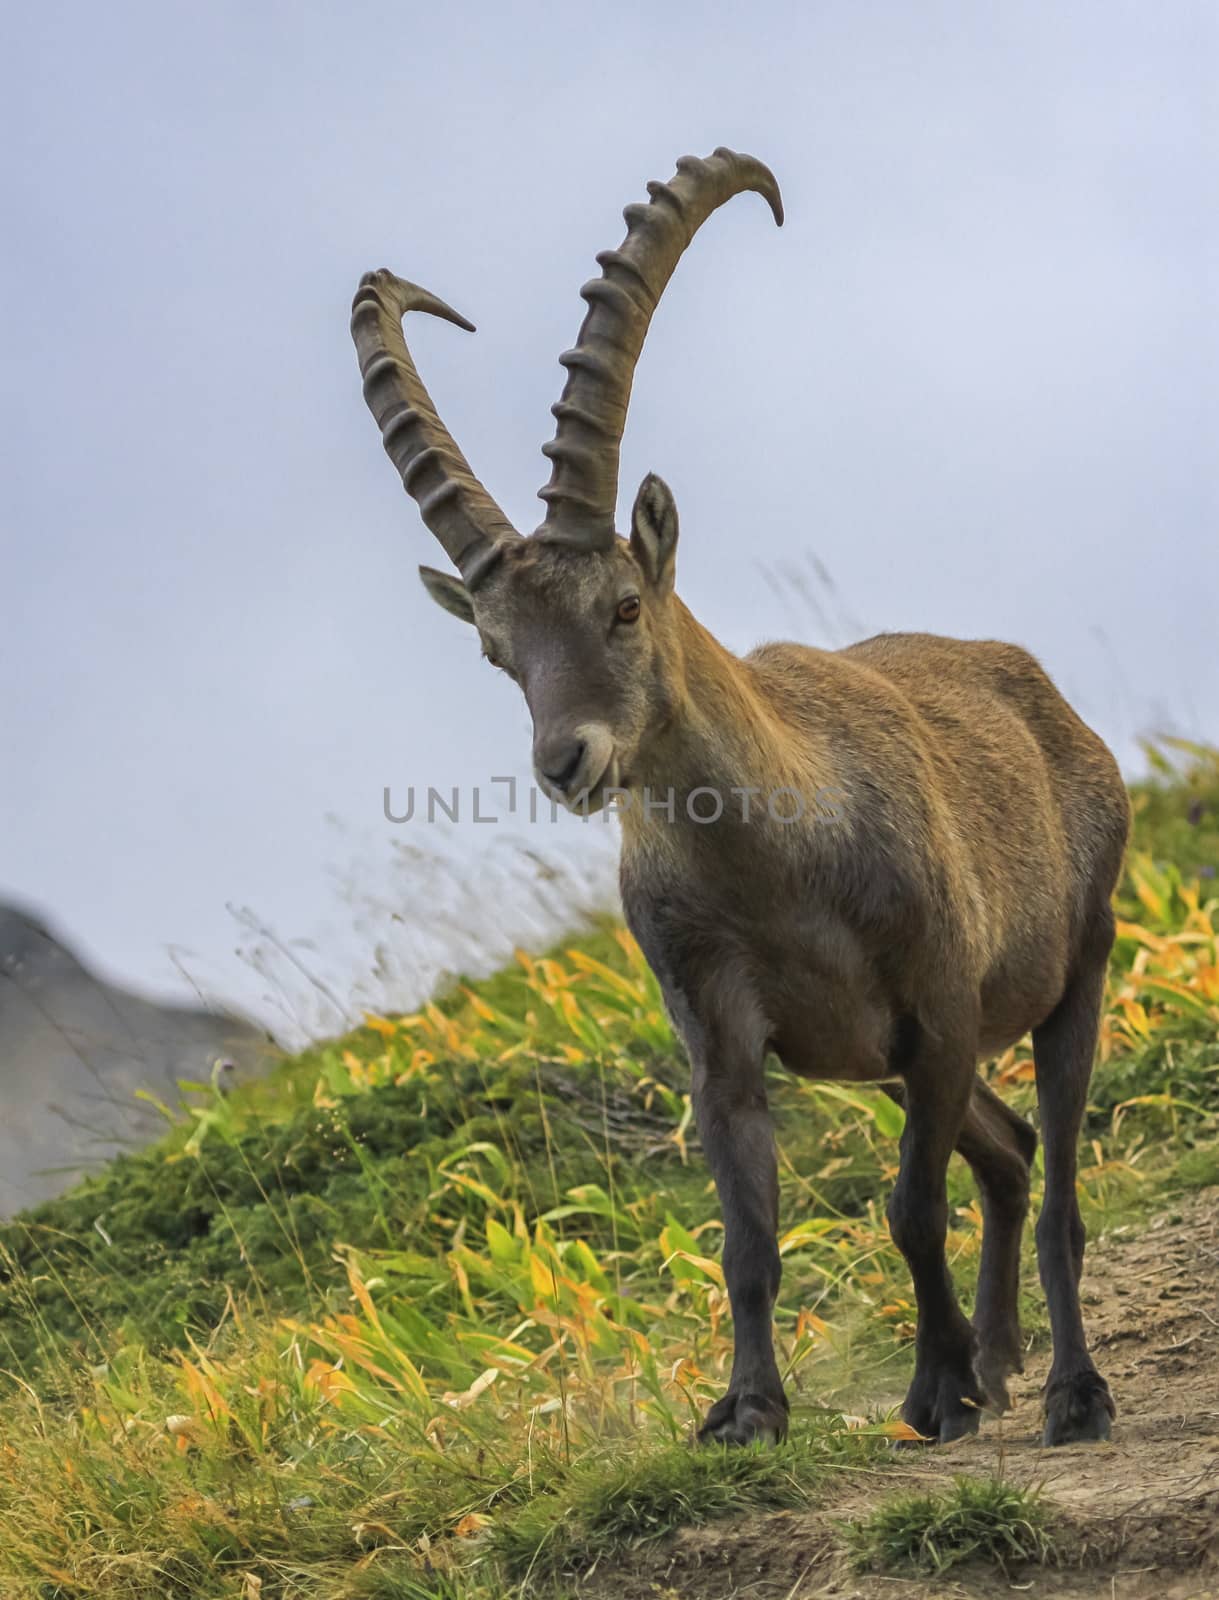 Steinbock or Alpine Capra Ibex portrait at Colombiere pass by day, France